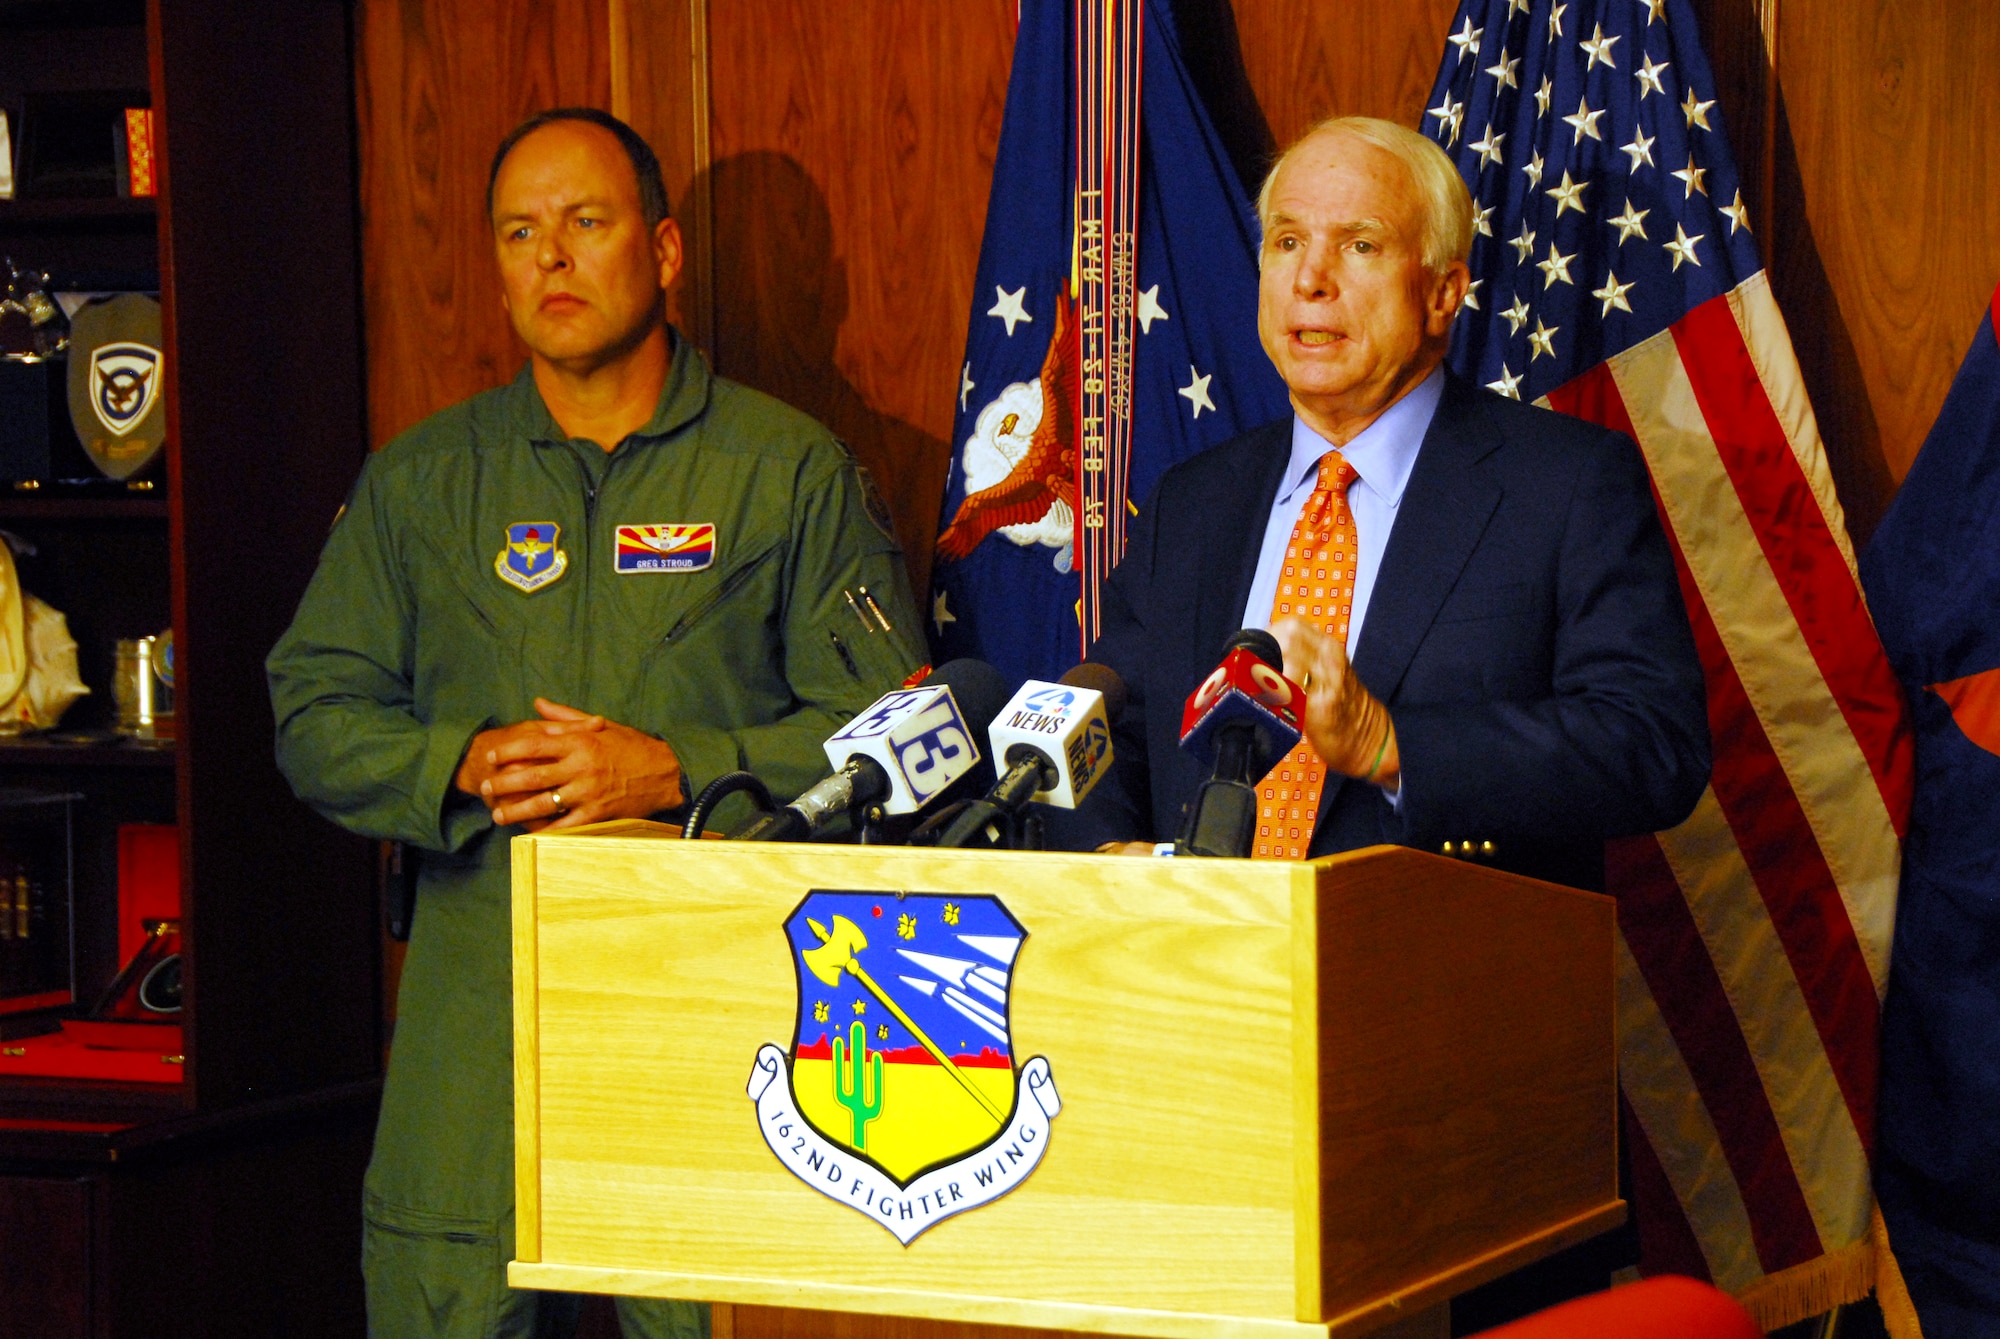 U.S. Senator John McCain and Col. Greg Stroud, 162nd Fighter Wing commander, answer questions during  a news conference Nov. 24 at the Arizona Air National Guard base at Tucson International Airport. Senator McCain visited to show support for the wing and its future.  (U.S Air Force photo by Master Sgt. David Neve)